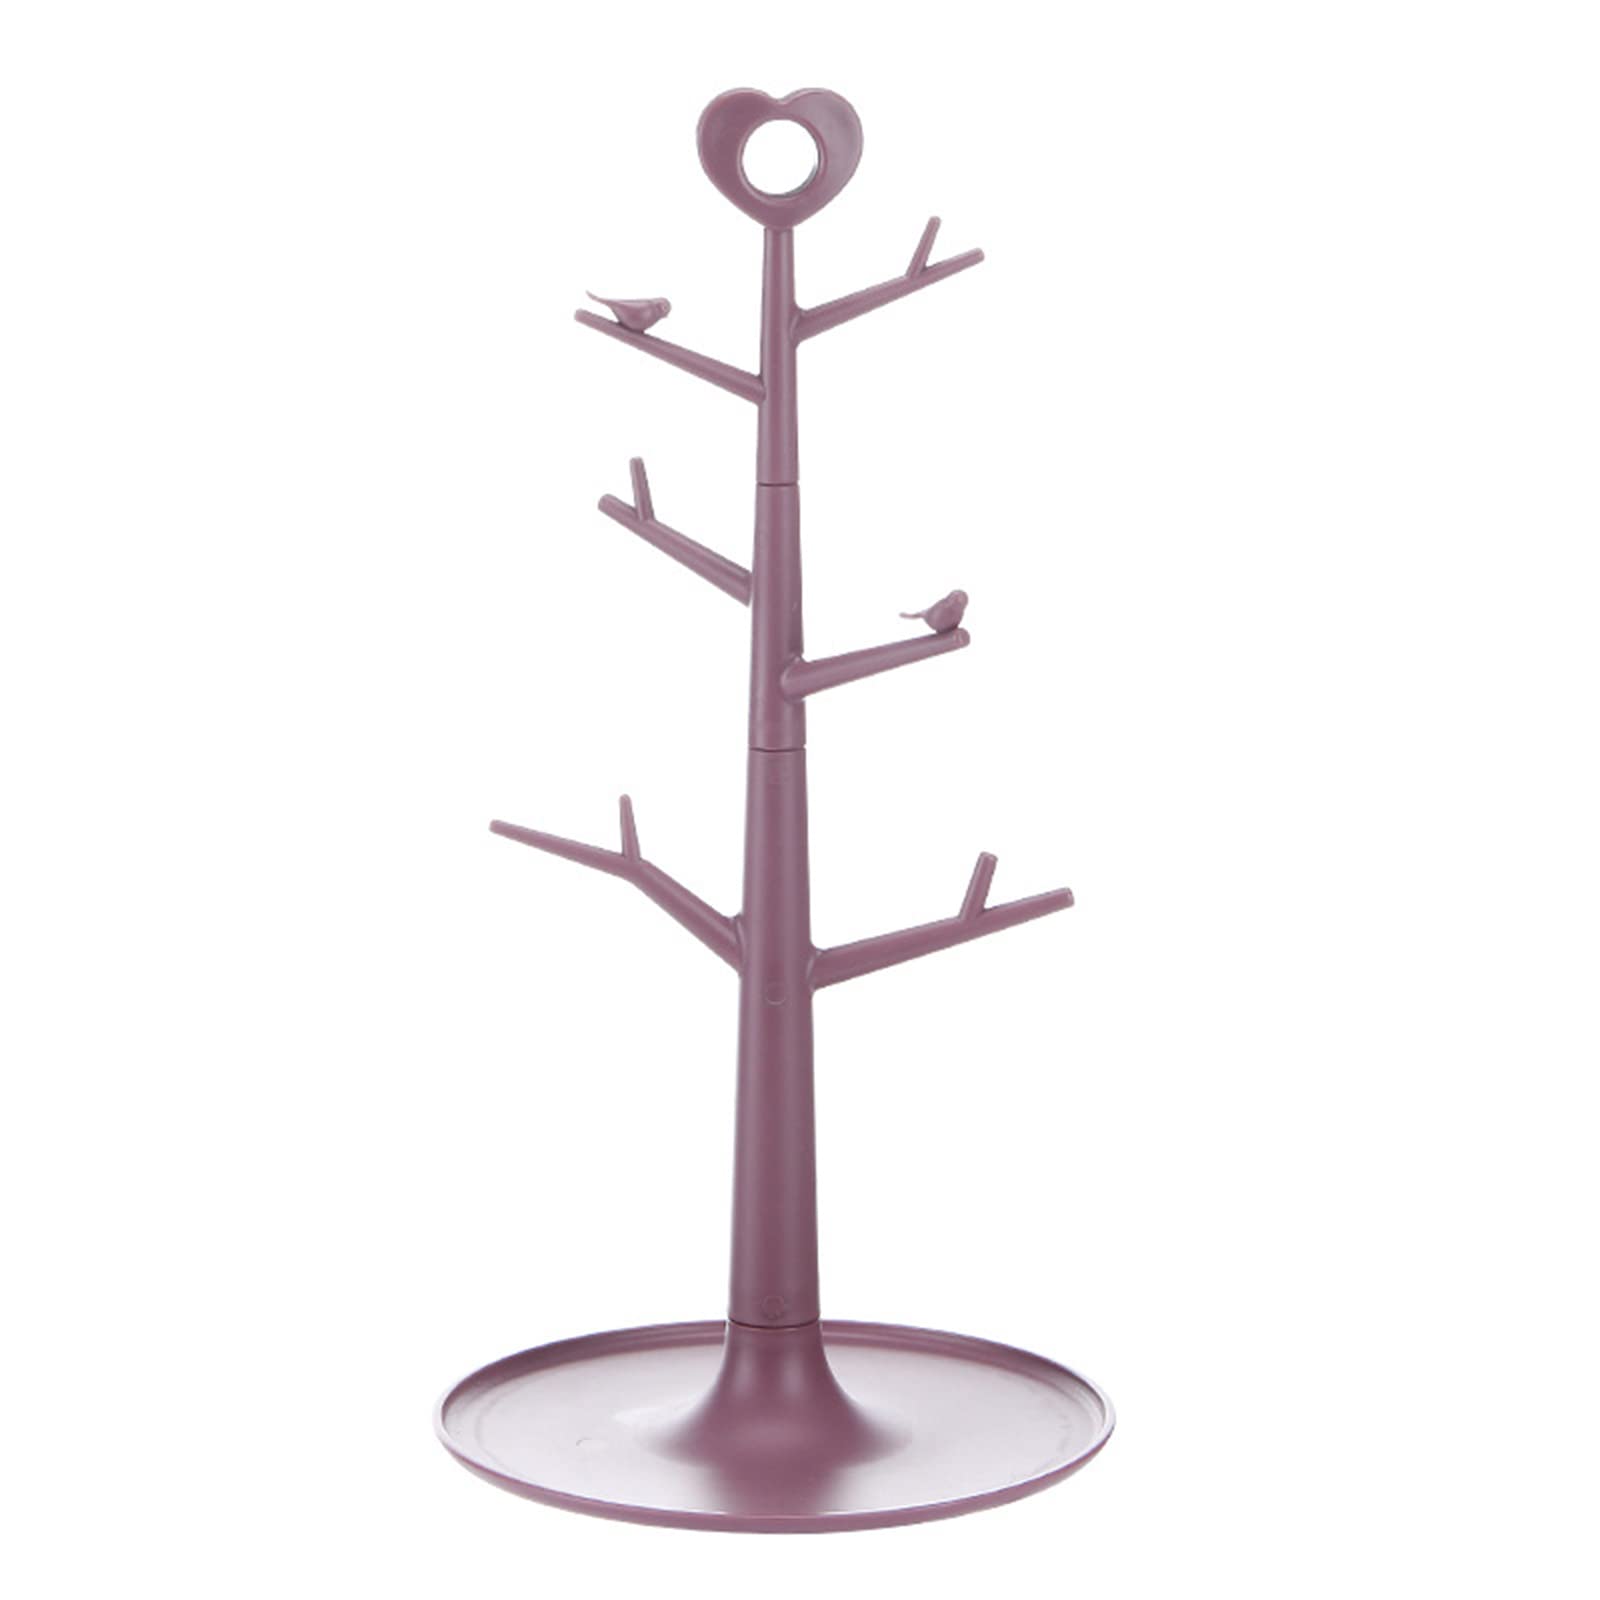 MISNODE Purple Mug Holder Tree, 14 Inch Coffee Cup Mug Rack, Removable Stand Hanging Drain Cup Organizer with 6 Hooks, Plastic Jewelry Rack for Home Kitchen Countertop Storage